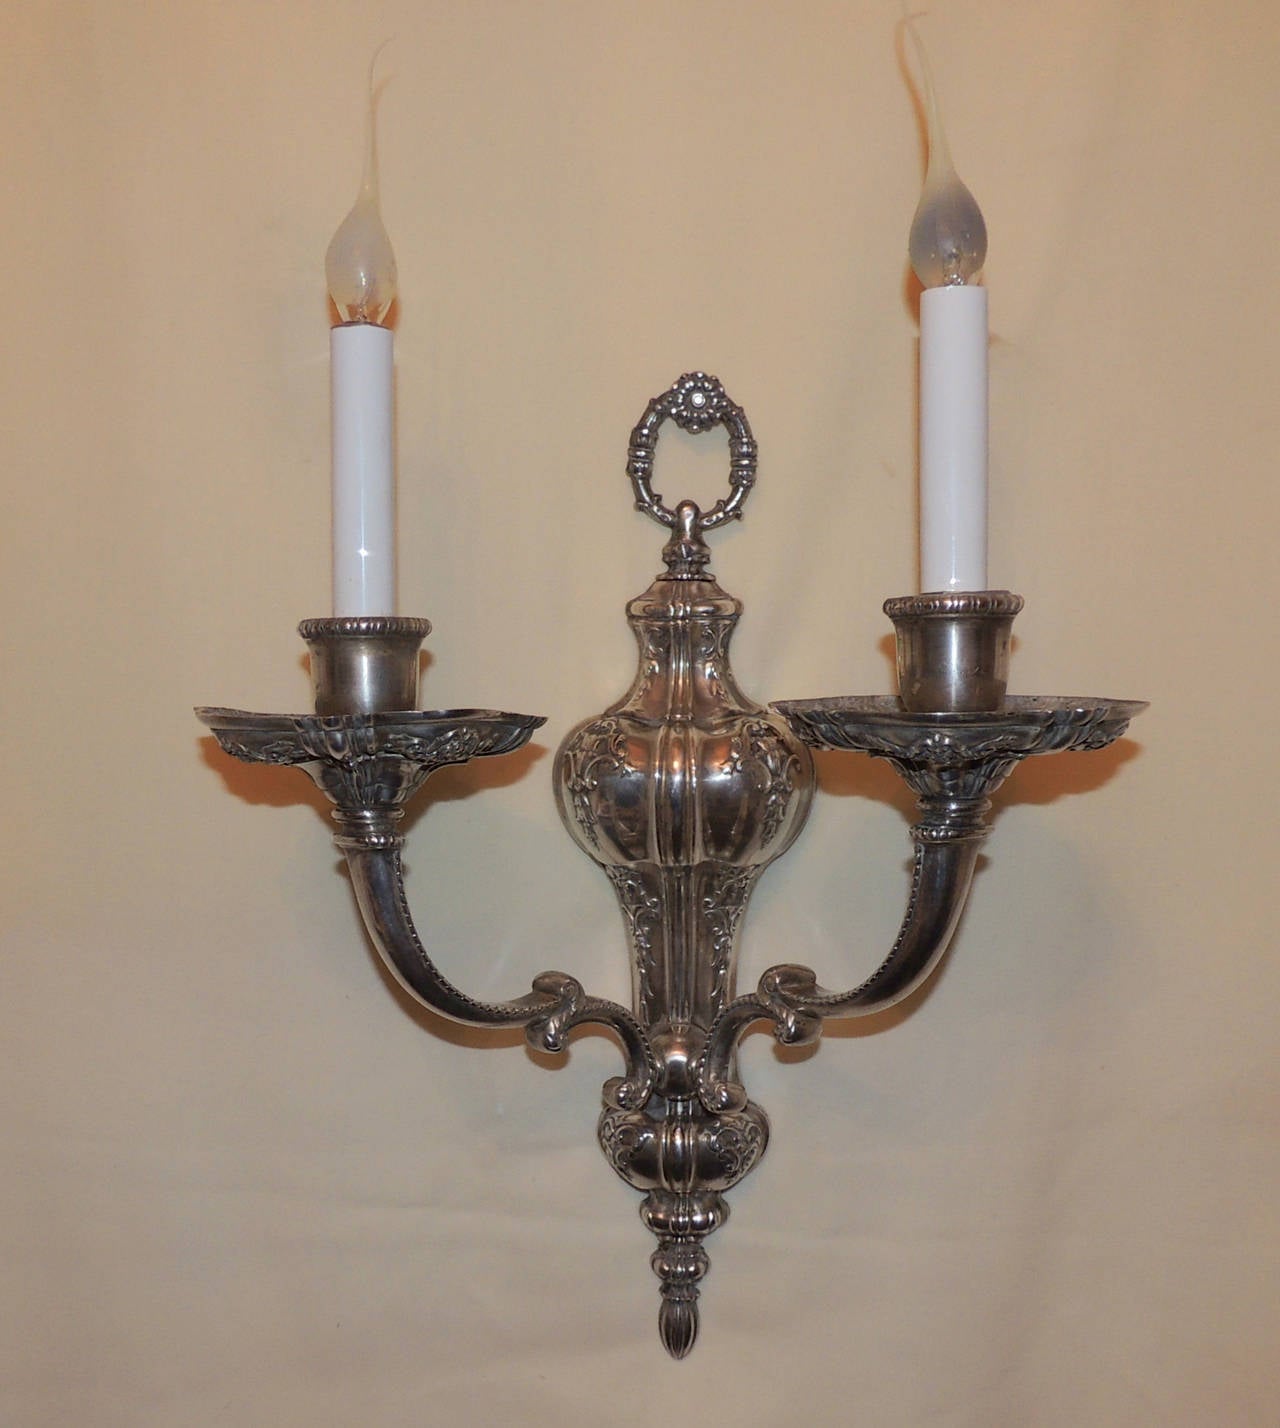 If you love intricate details, these marked Caldwell sconces will fulfill that wish. Beautiful floral detail starts at the ring at the top and continues throughout the center body of these two-arm sconces. The floral detail continues up the curved